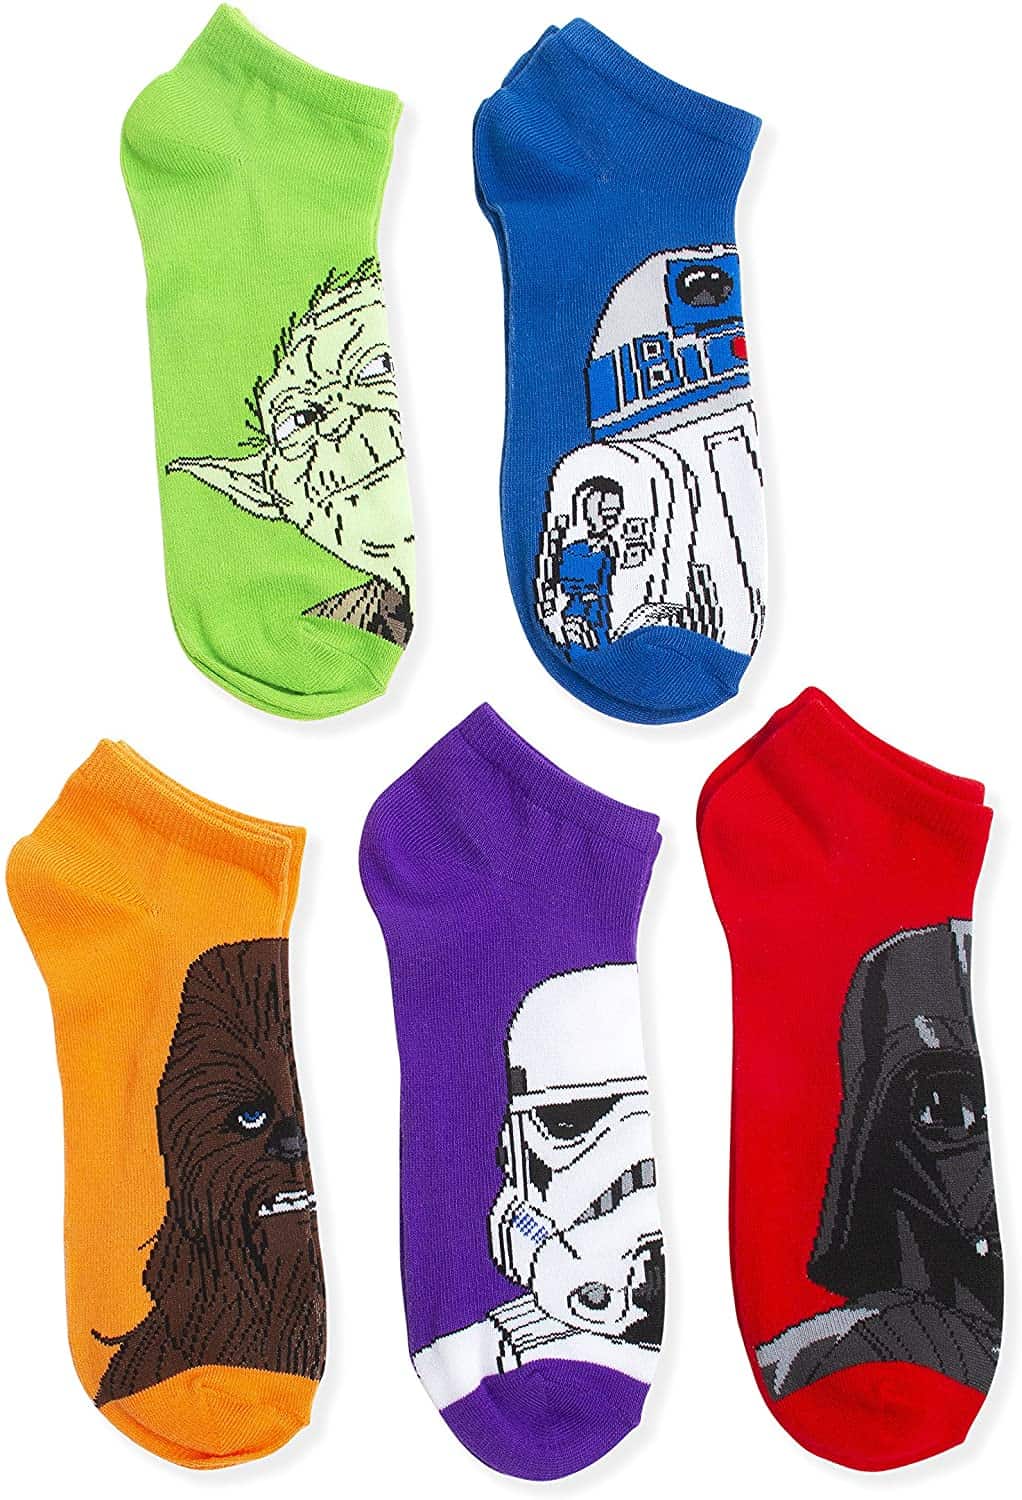 unique gifts for brother in law: Star War Men’s Socks